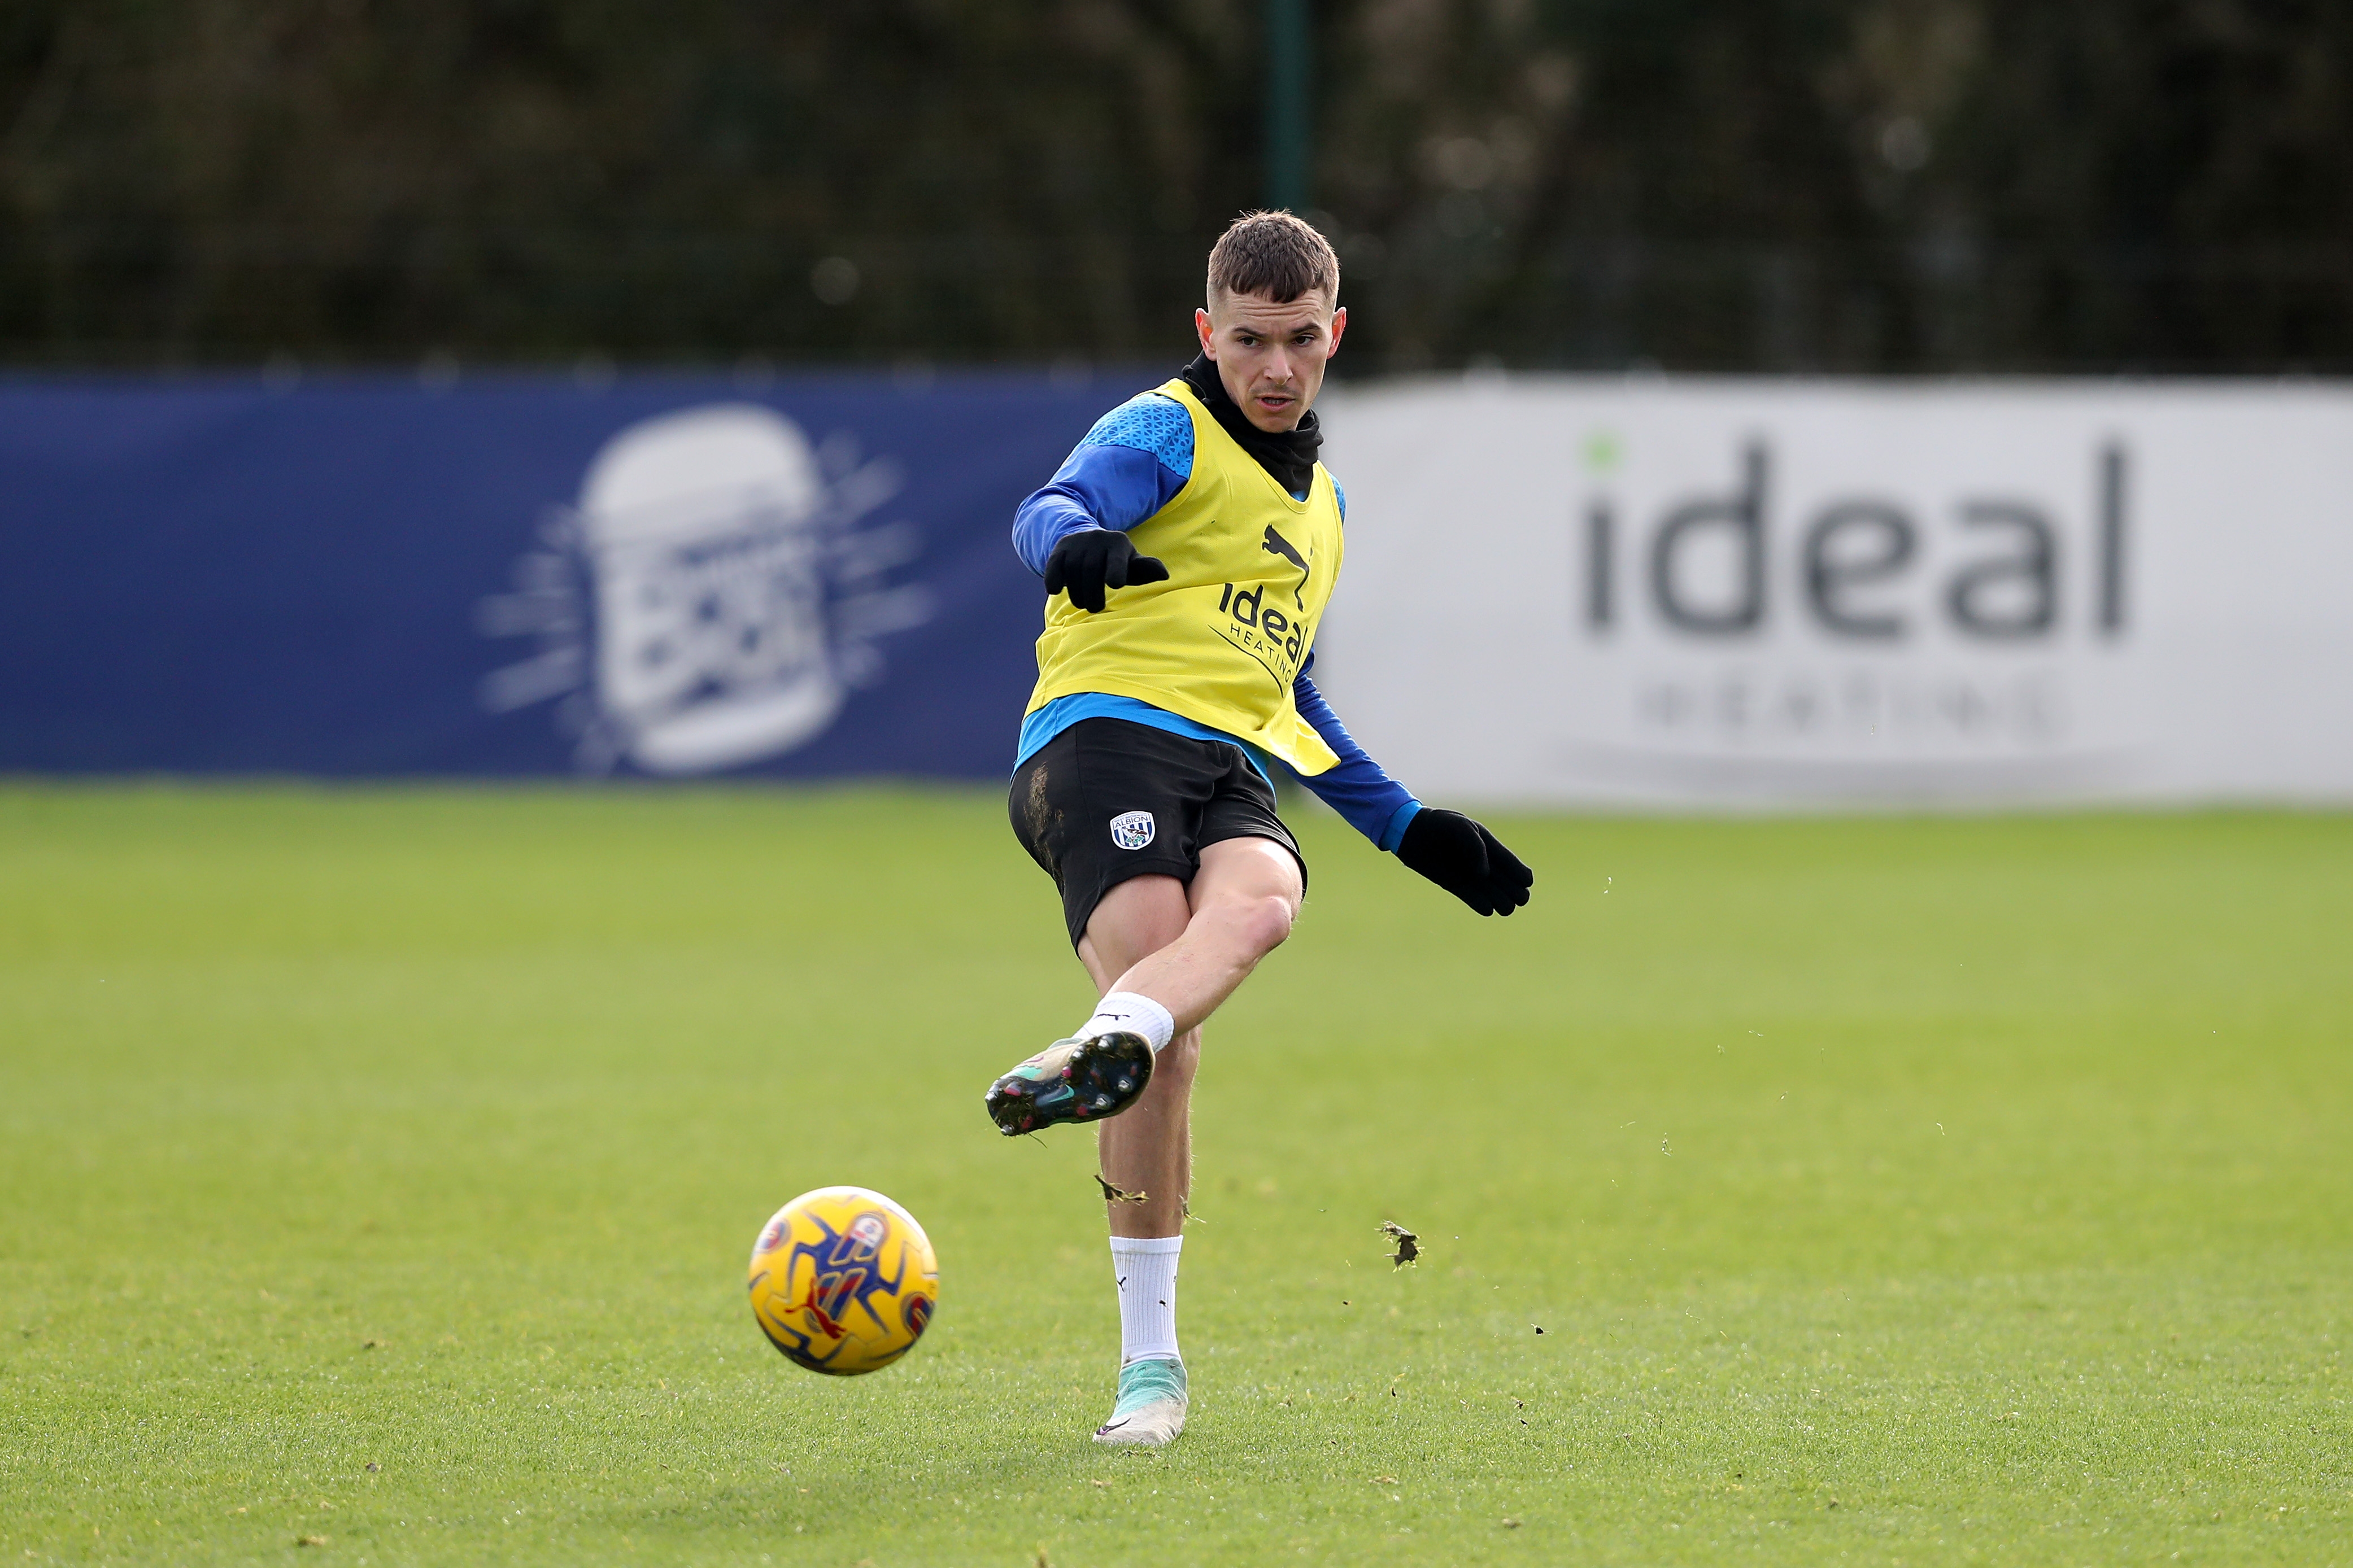 Conor Townsend passes the ball during training